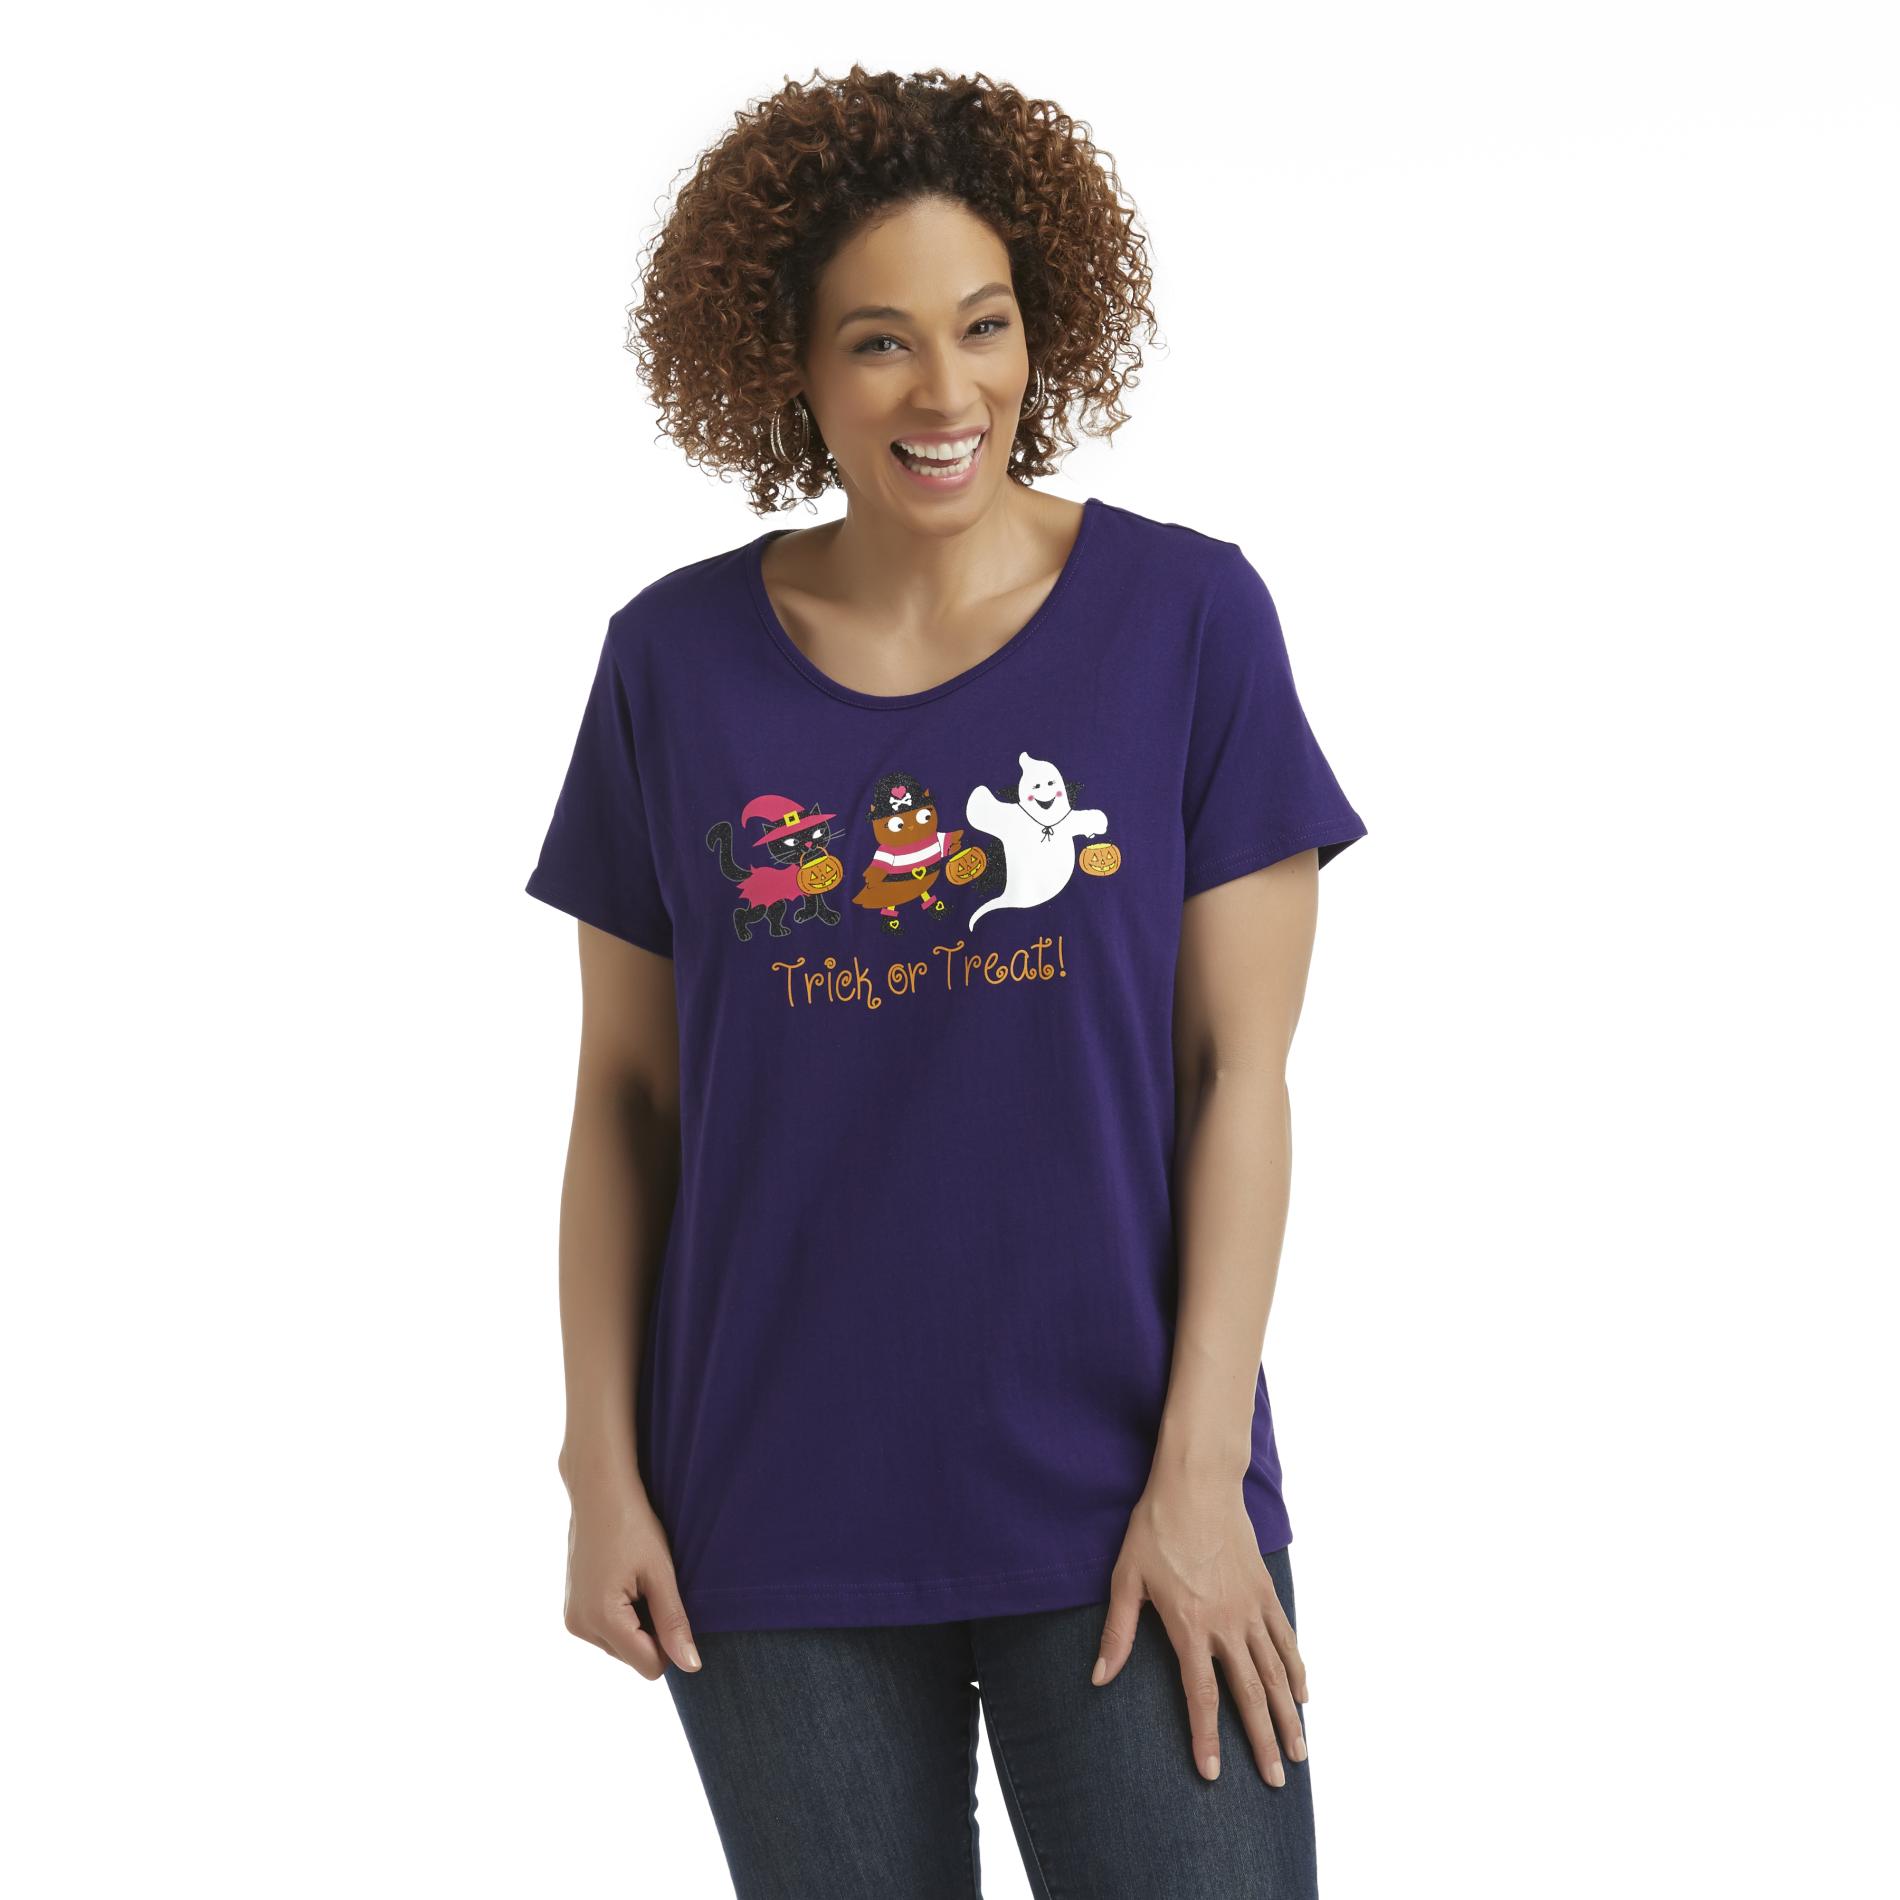 Holiday Editions Women's Plus Halloween T-Shirt - Trick or Treat